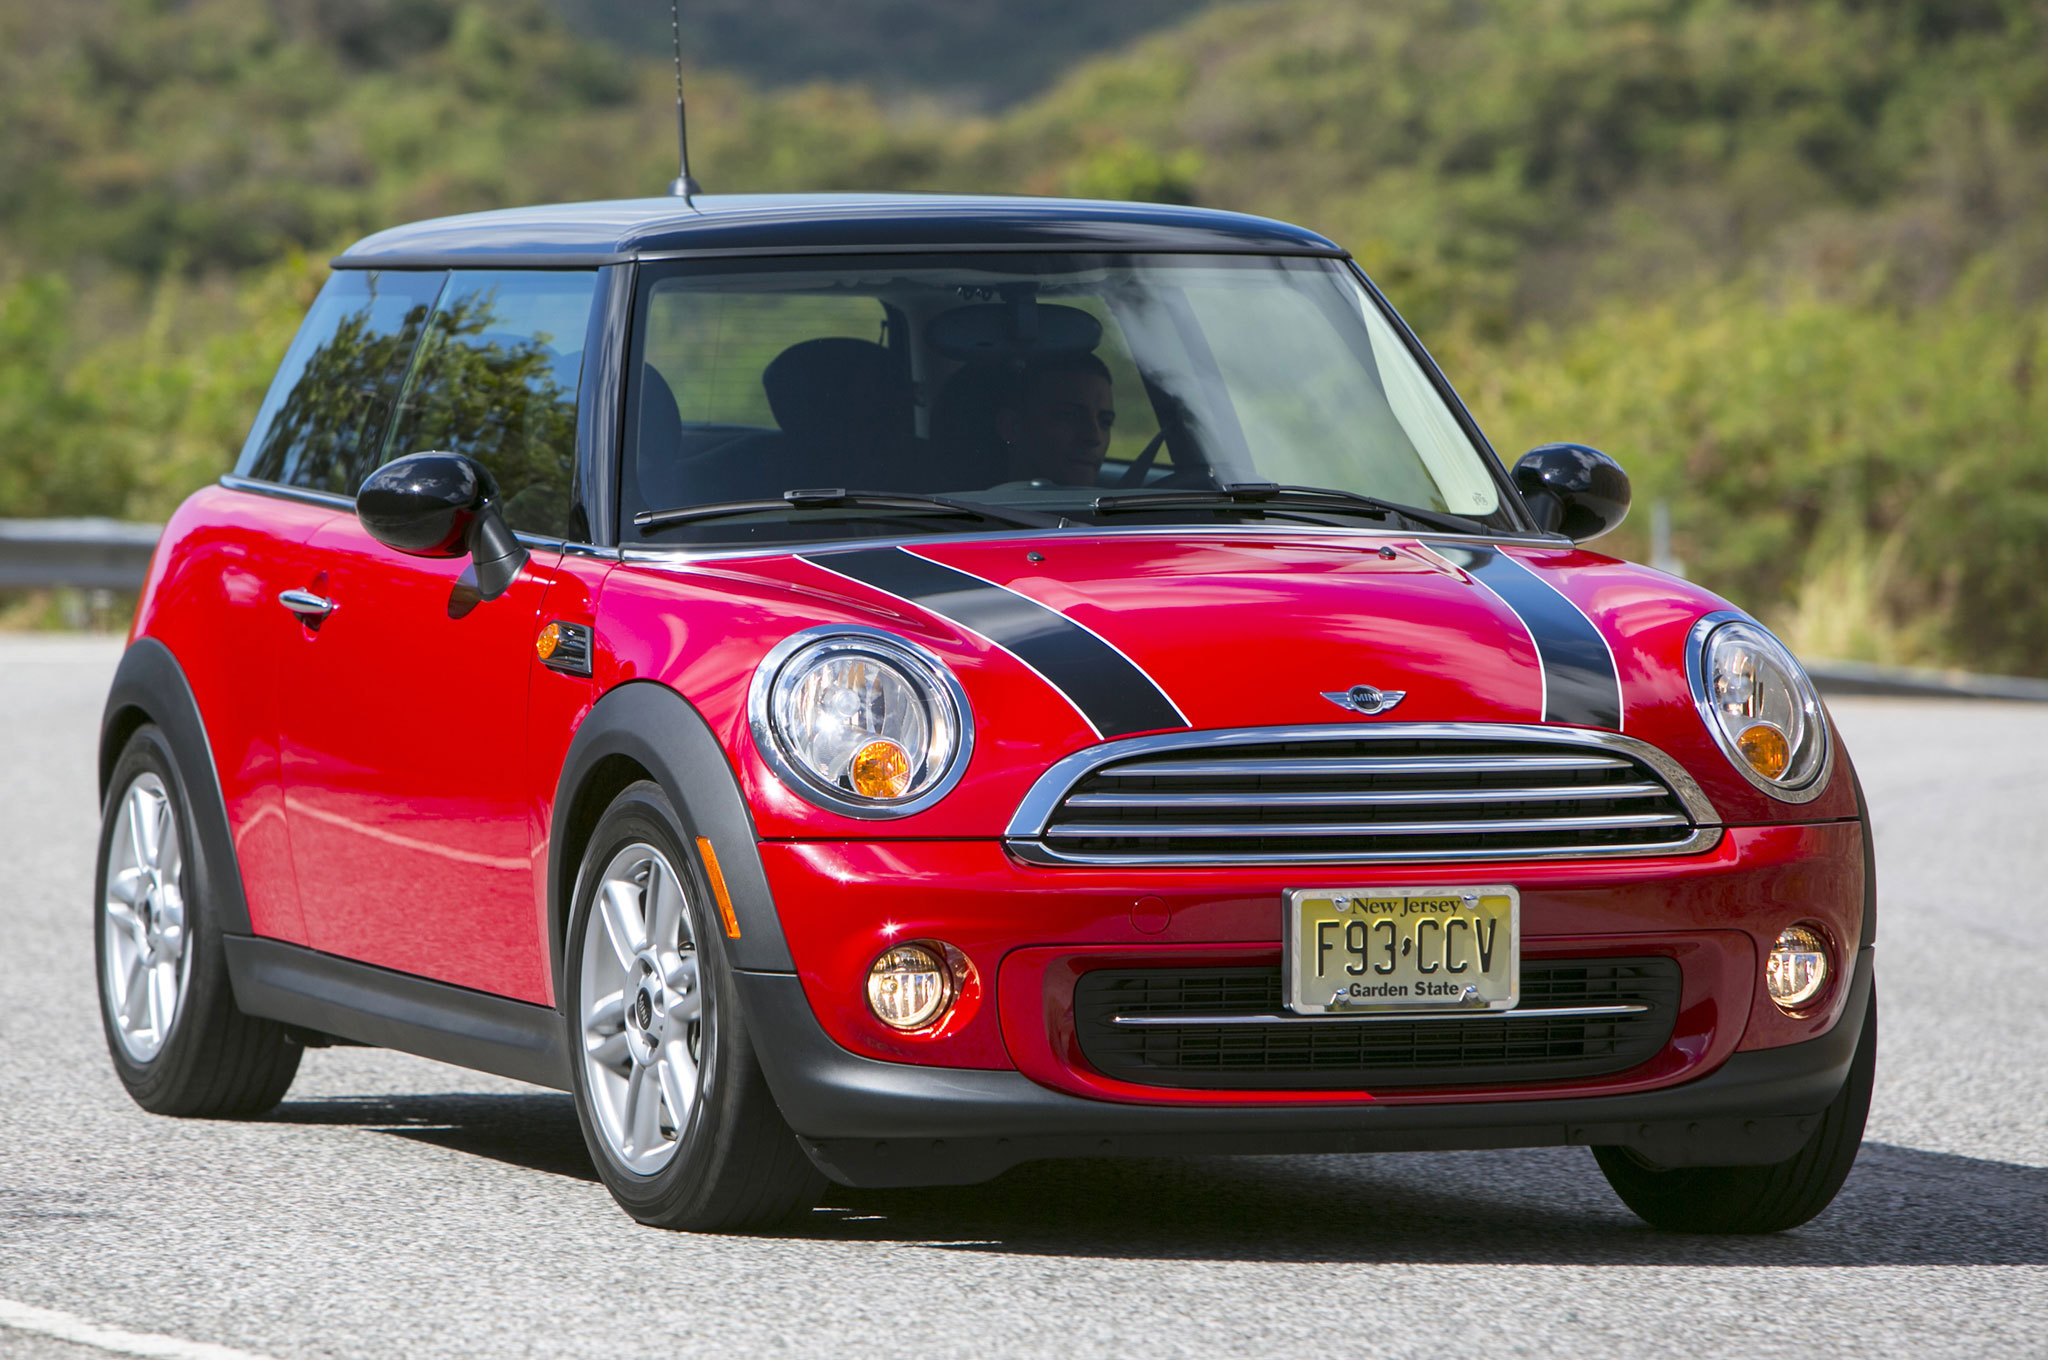 New car Mini Cooper S 2014 wallpapers and images - wallpapers, pictures